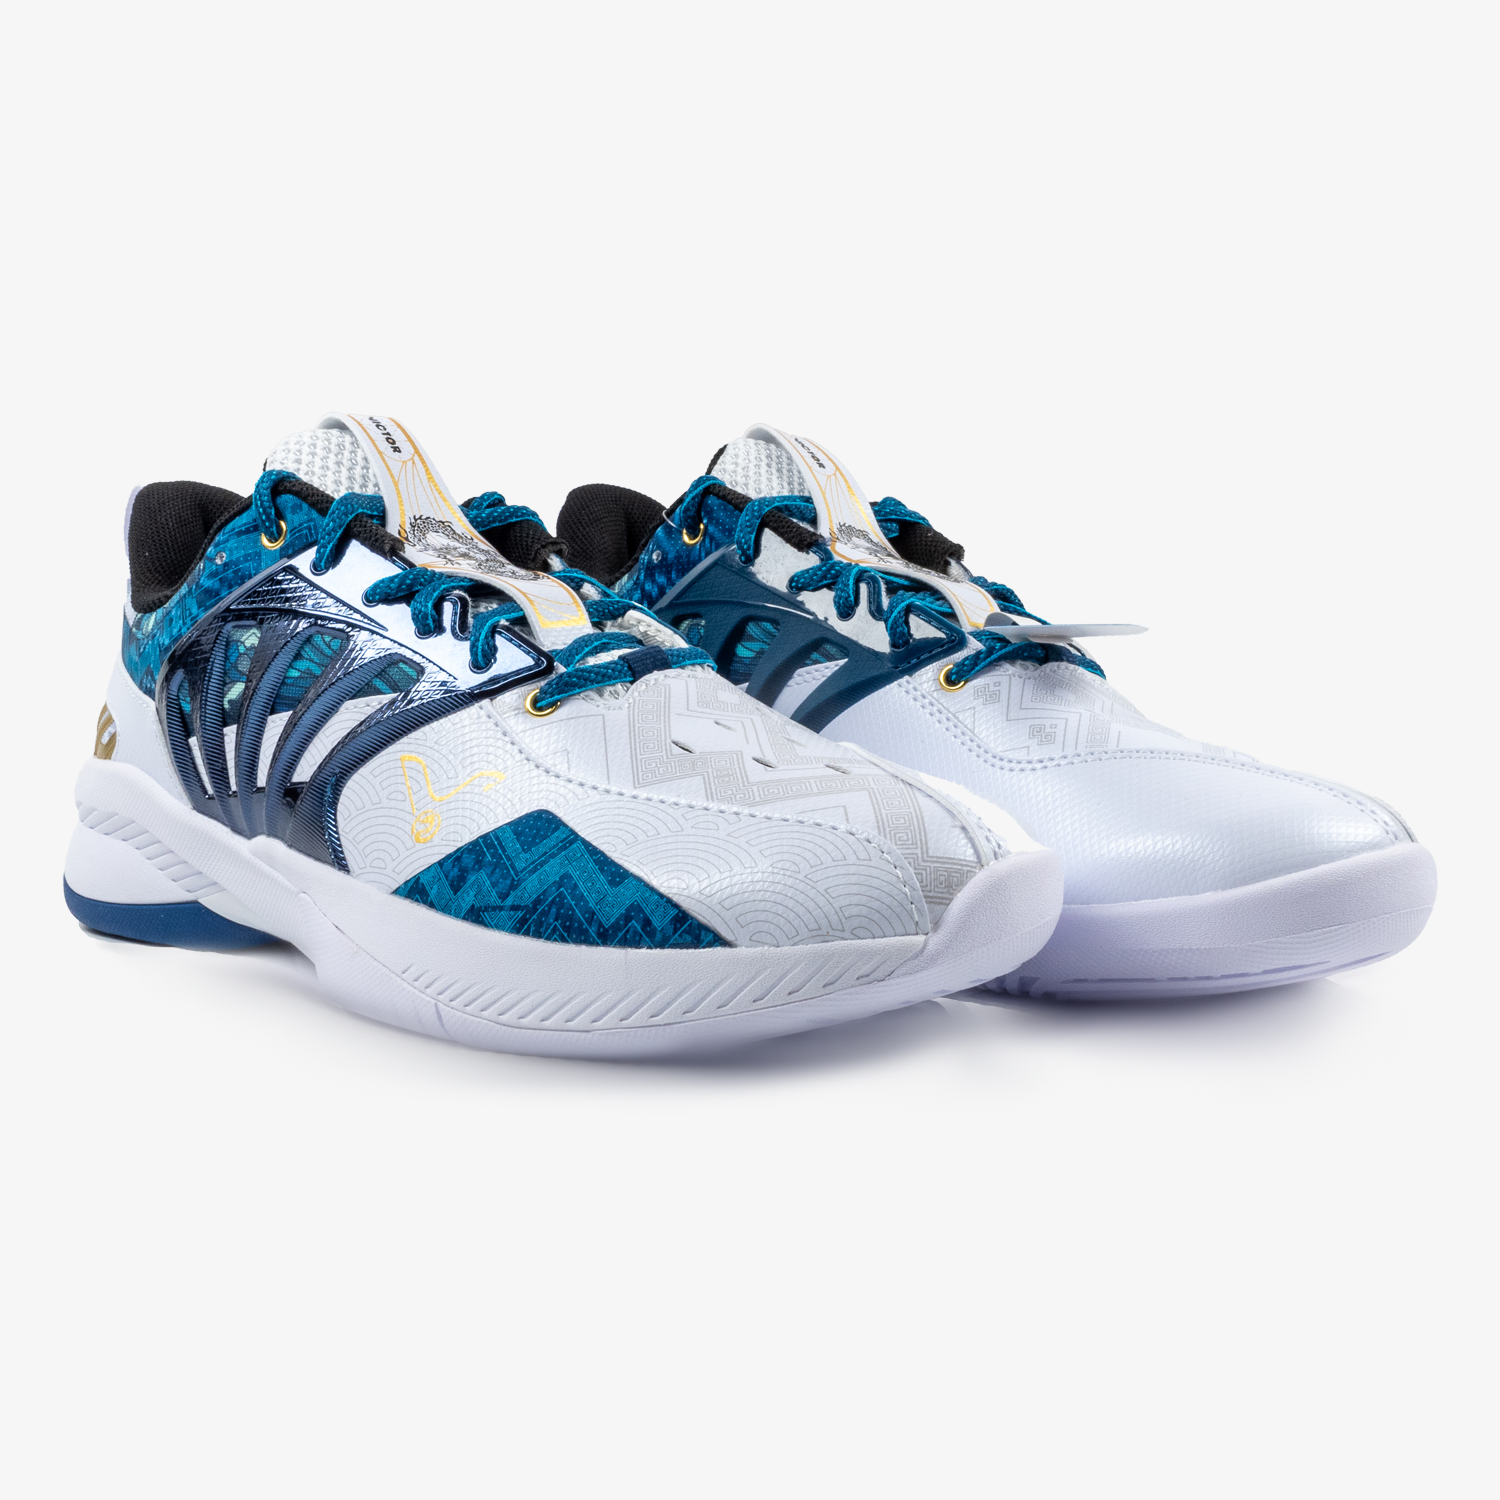 Victor Chinese New Year Edition Court Shoes A790CNY-EX-AB (White/Blue)